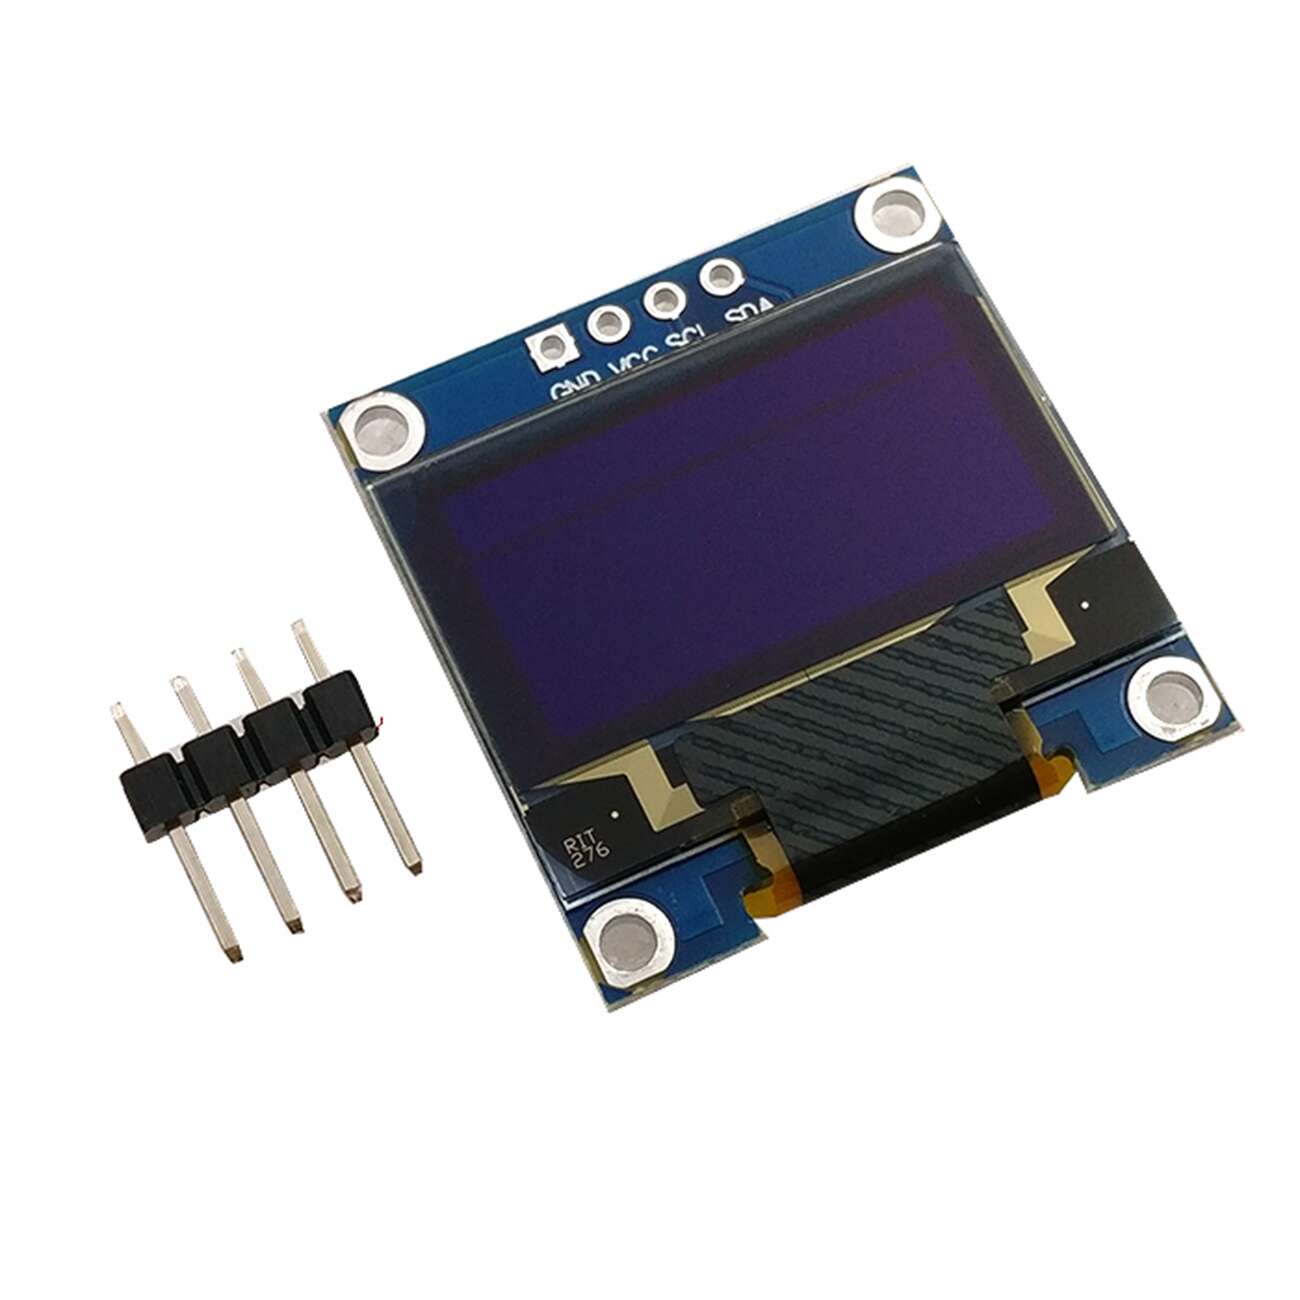 OLED Display I2C 4 Pin 0.96″ – Unsoldered